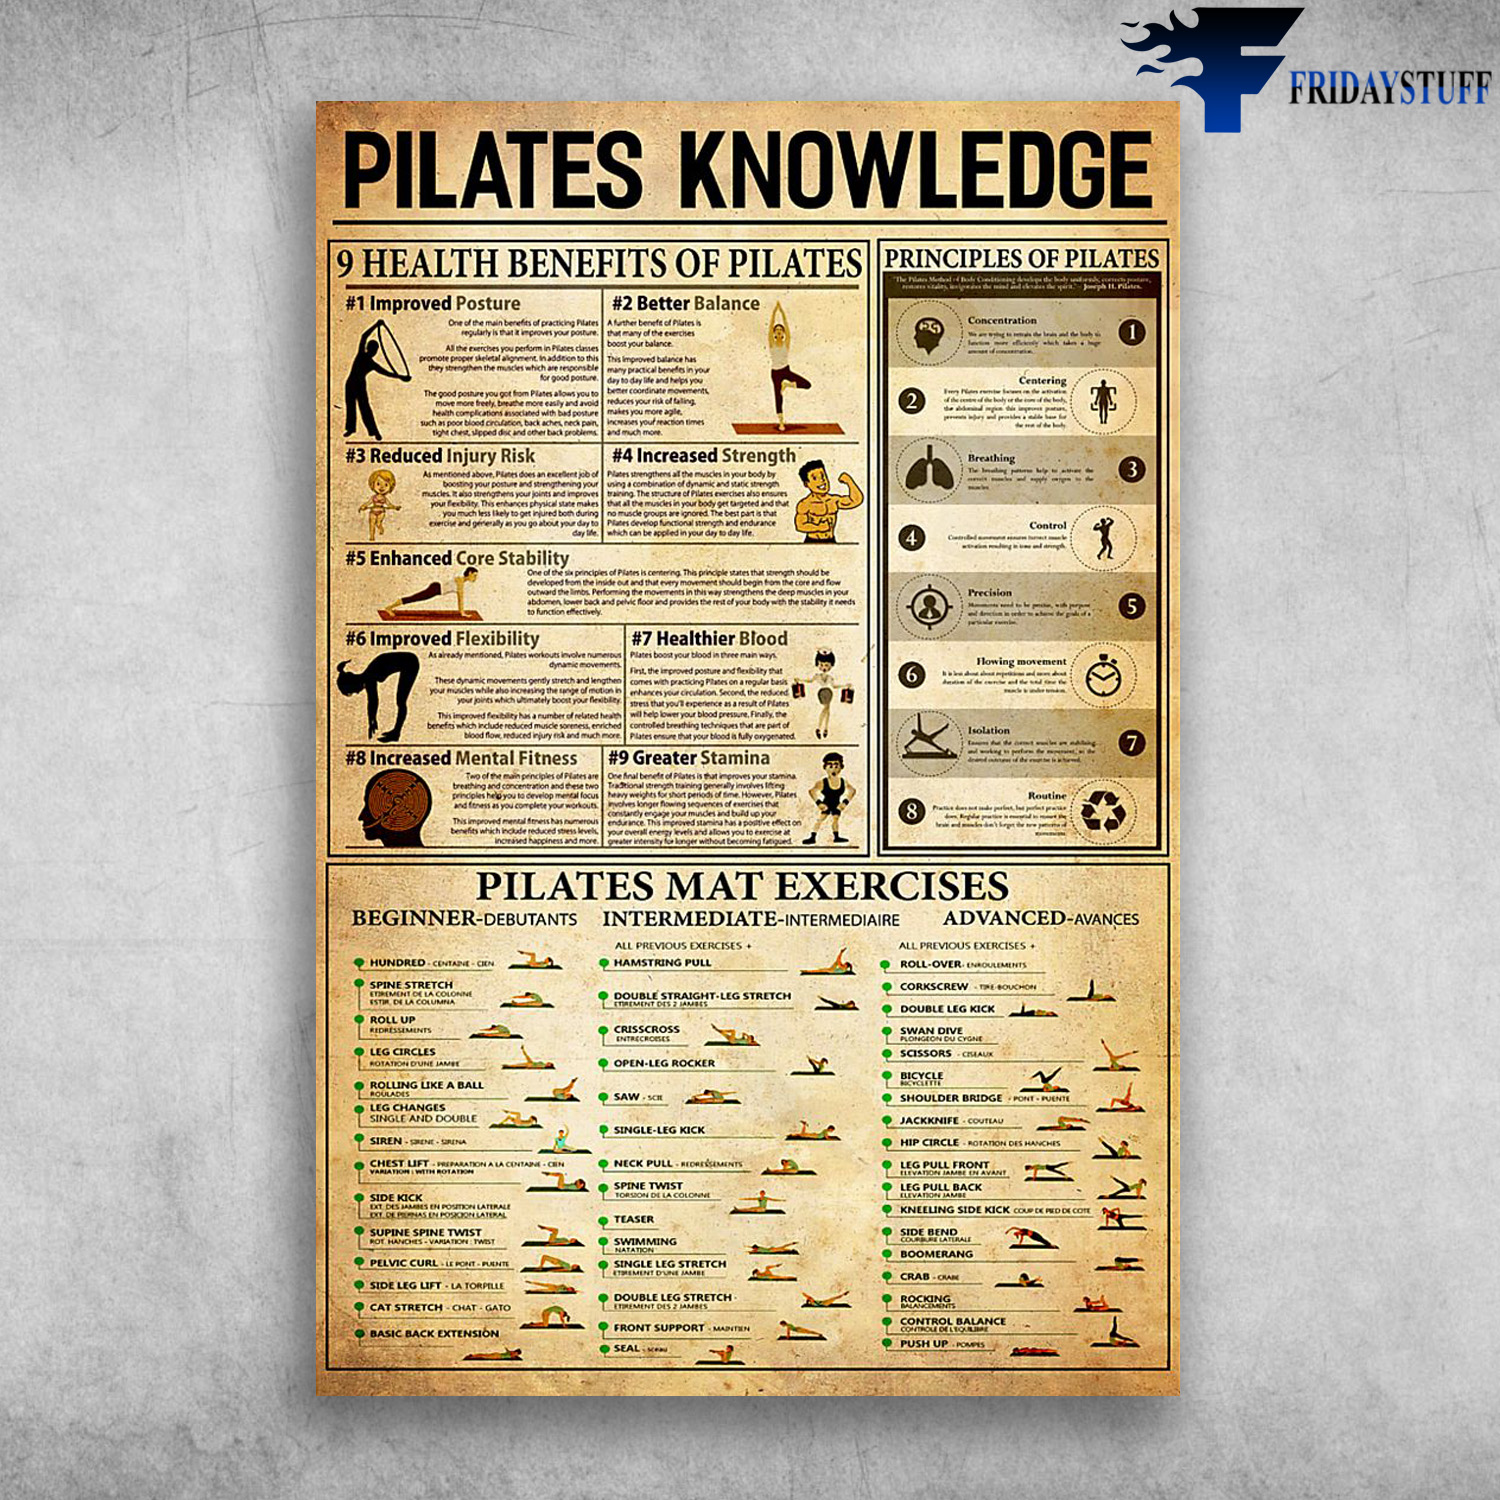 Six Principles of Pilates and How they Help you Move Better